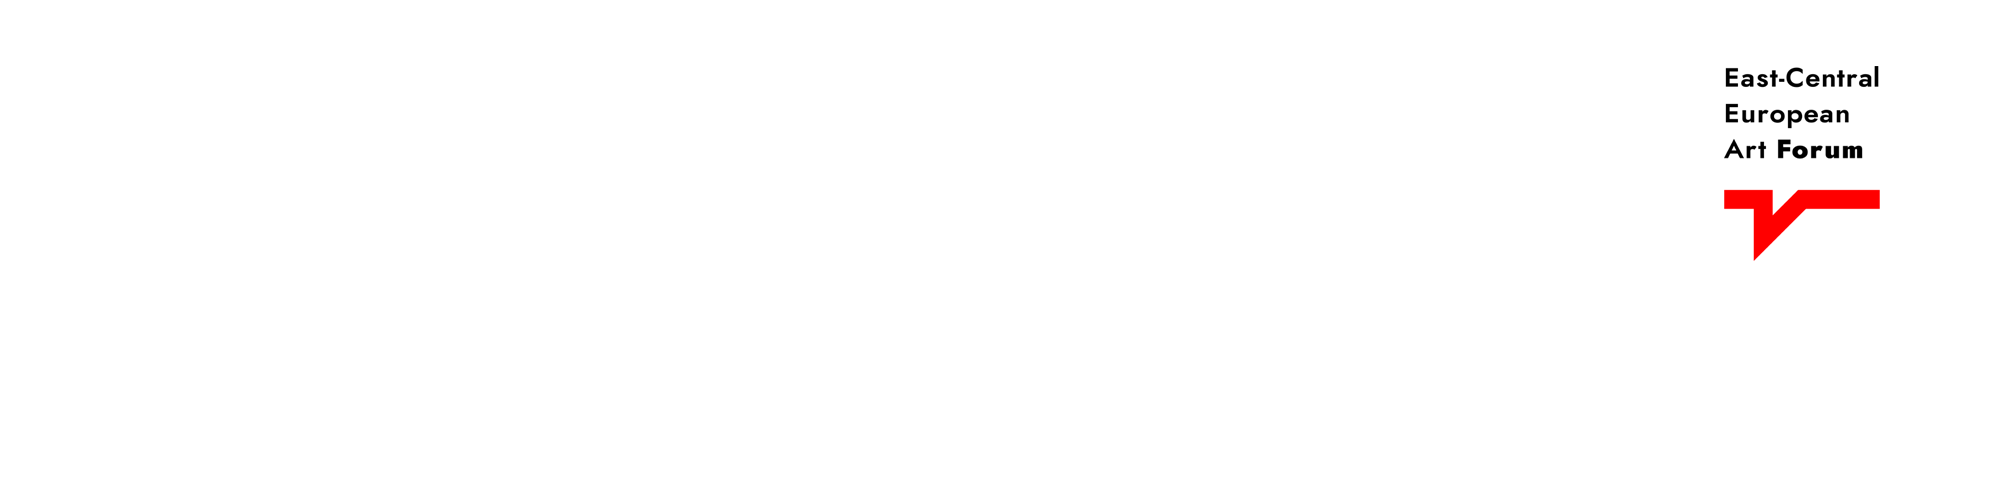 Theorizing the Geography of East-Central European Art /  / // East-Central European Art Forum, Poznań 26–27.10.2018